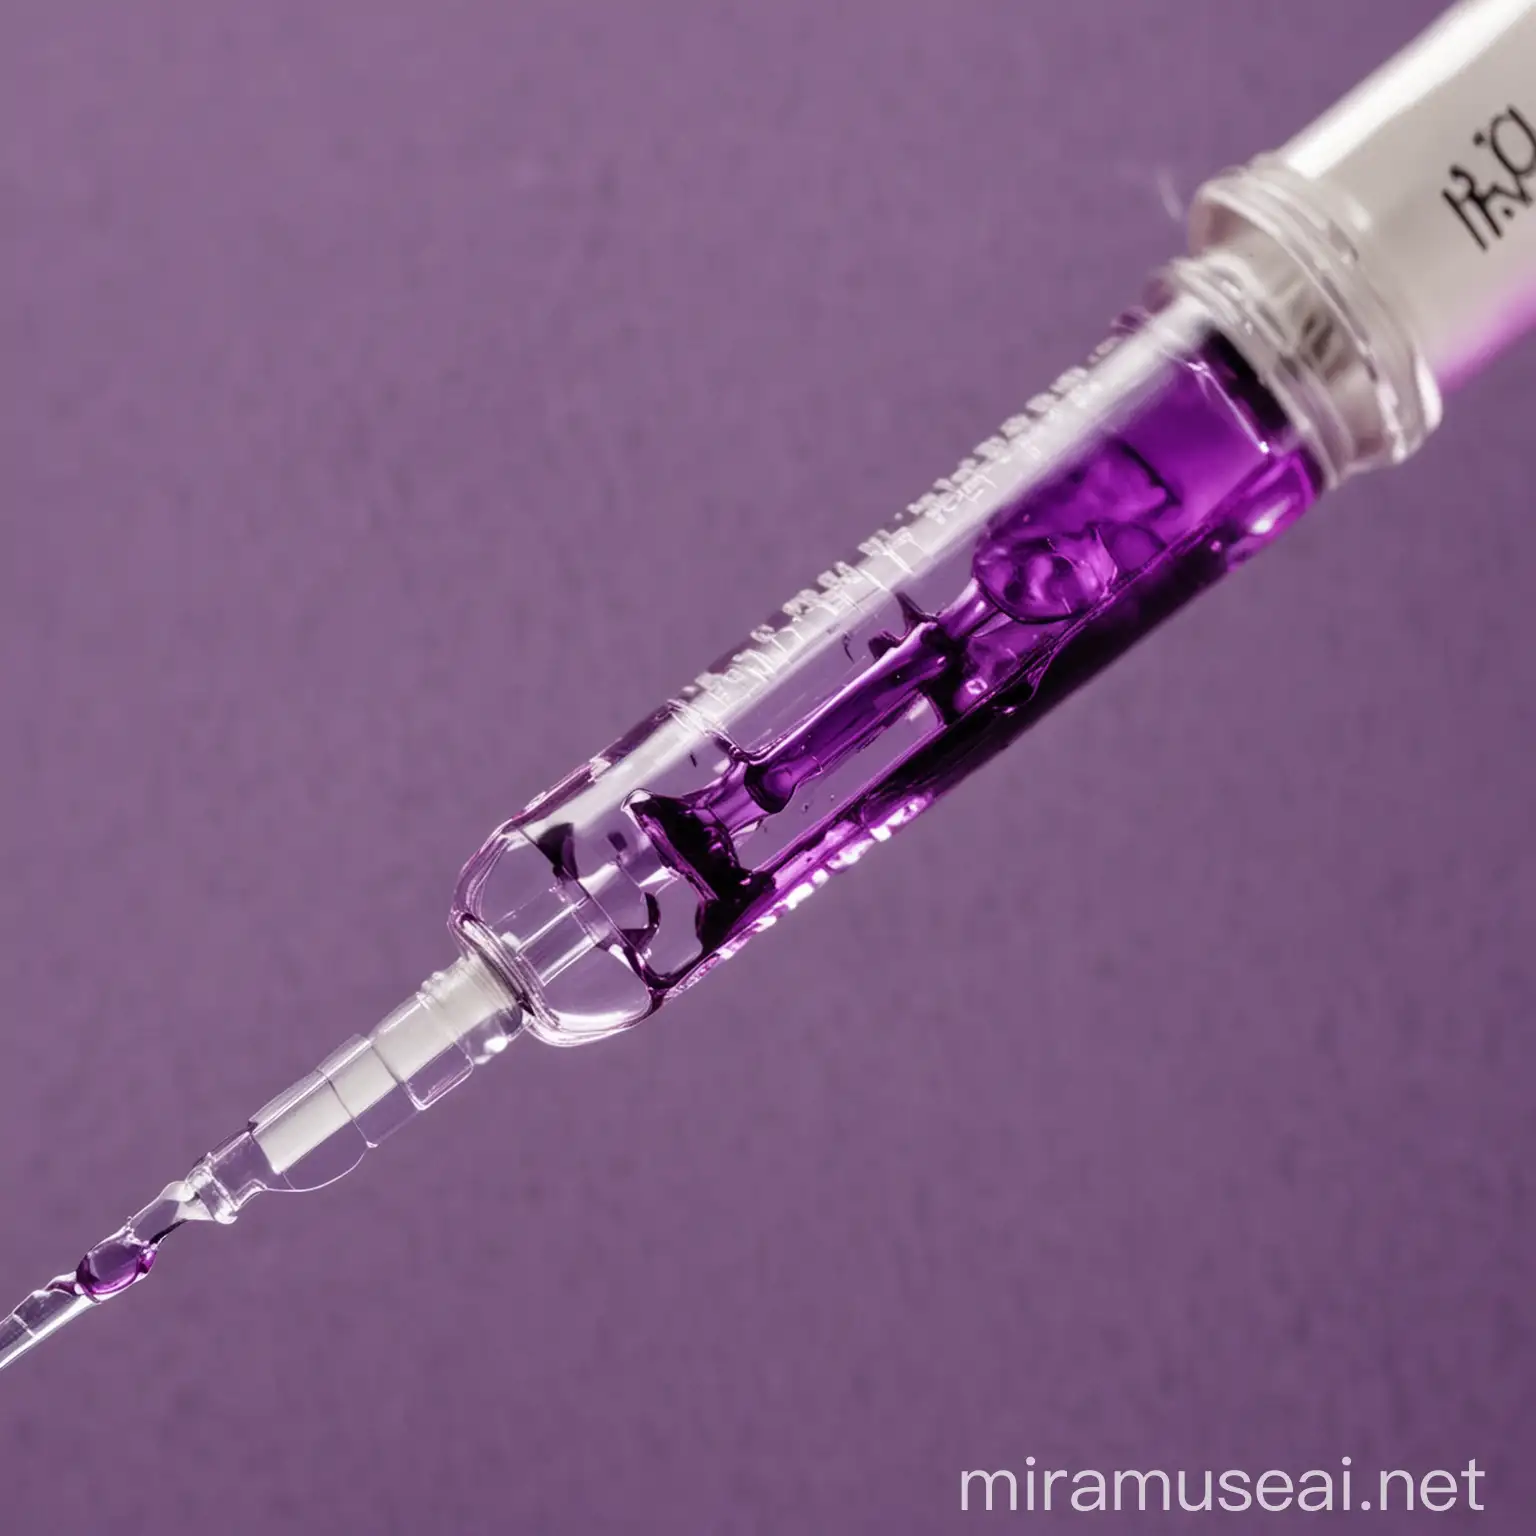 Medical Syringe with Purple Liquid for Healthcare Concept